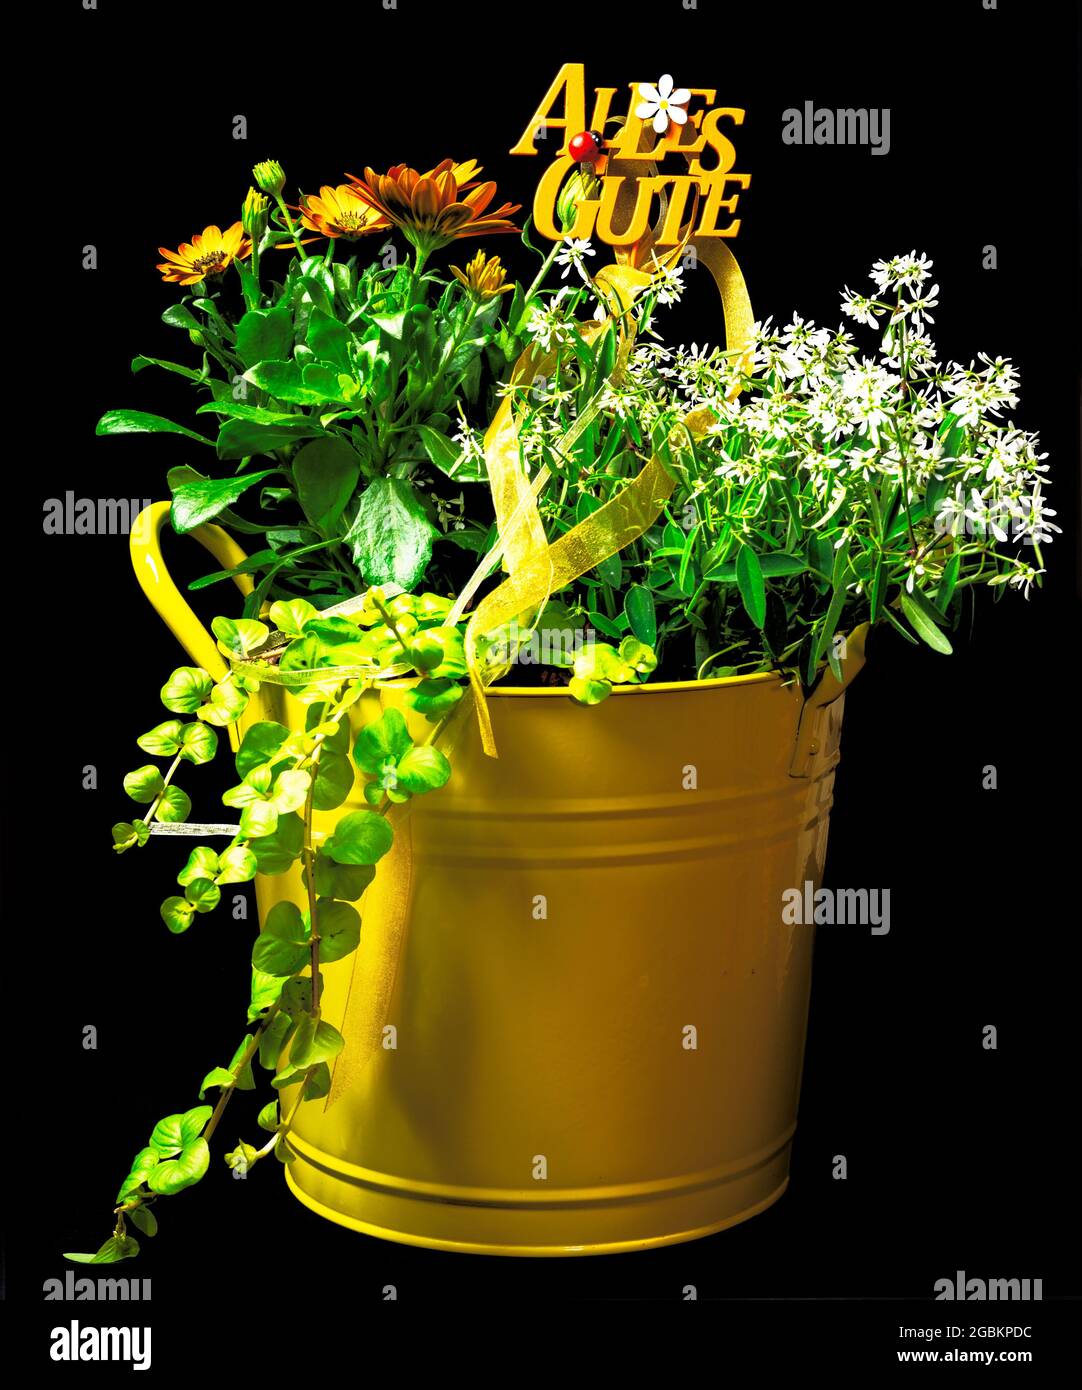 Present with flowers in a yellow bucket. German text:  Alles Gute, meaning all the best Stock Photo